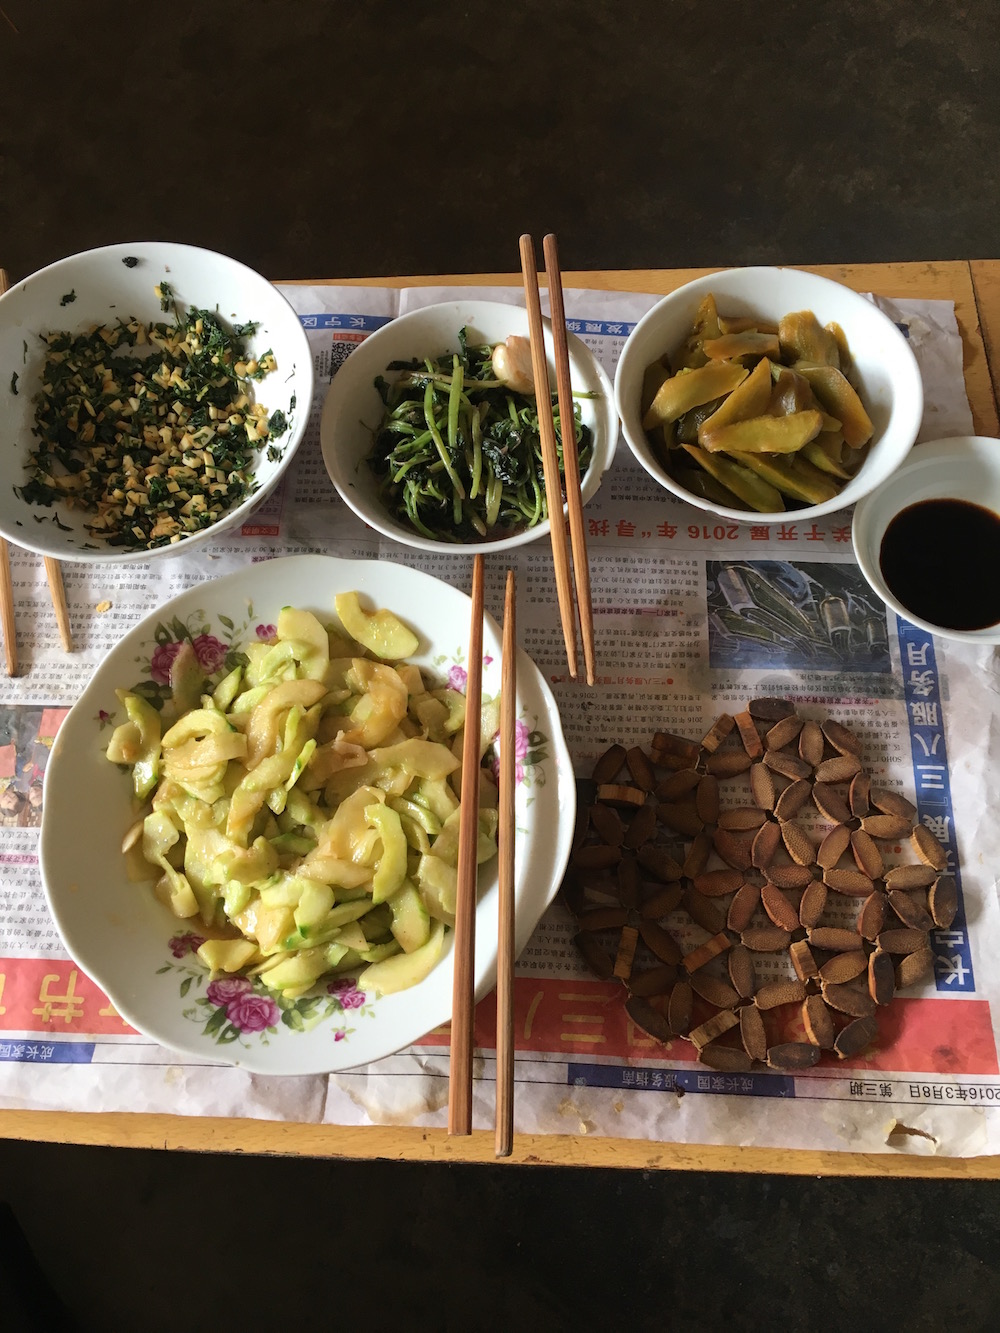 These were the side dishes that went with the porridge. Here we have tofu, string beans, pickled cucumber, and watermelon skin (Listed respectively from top left). 